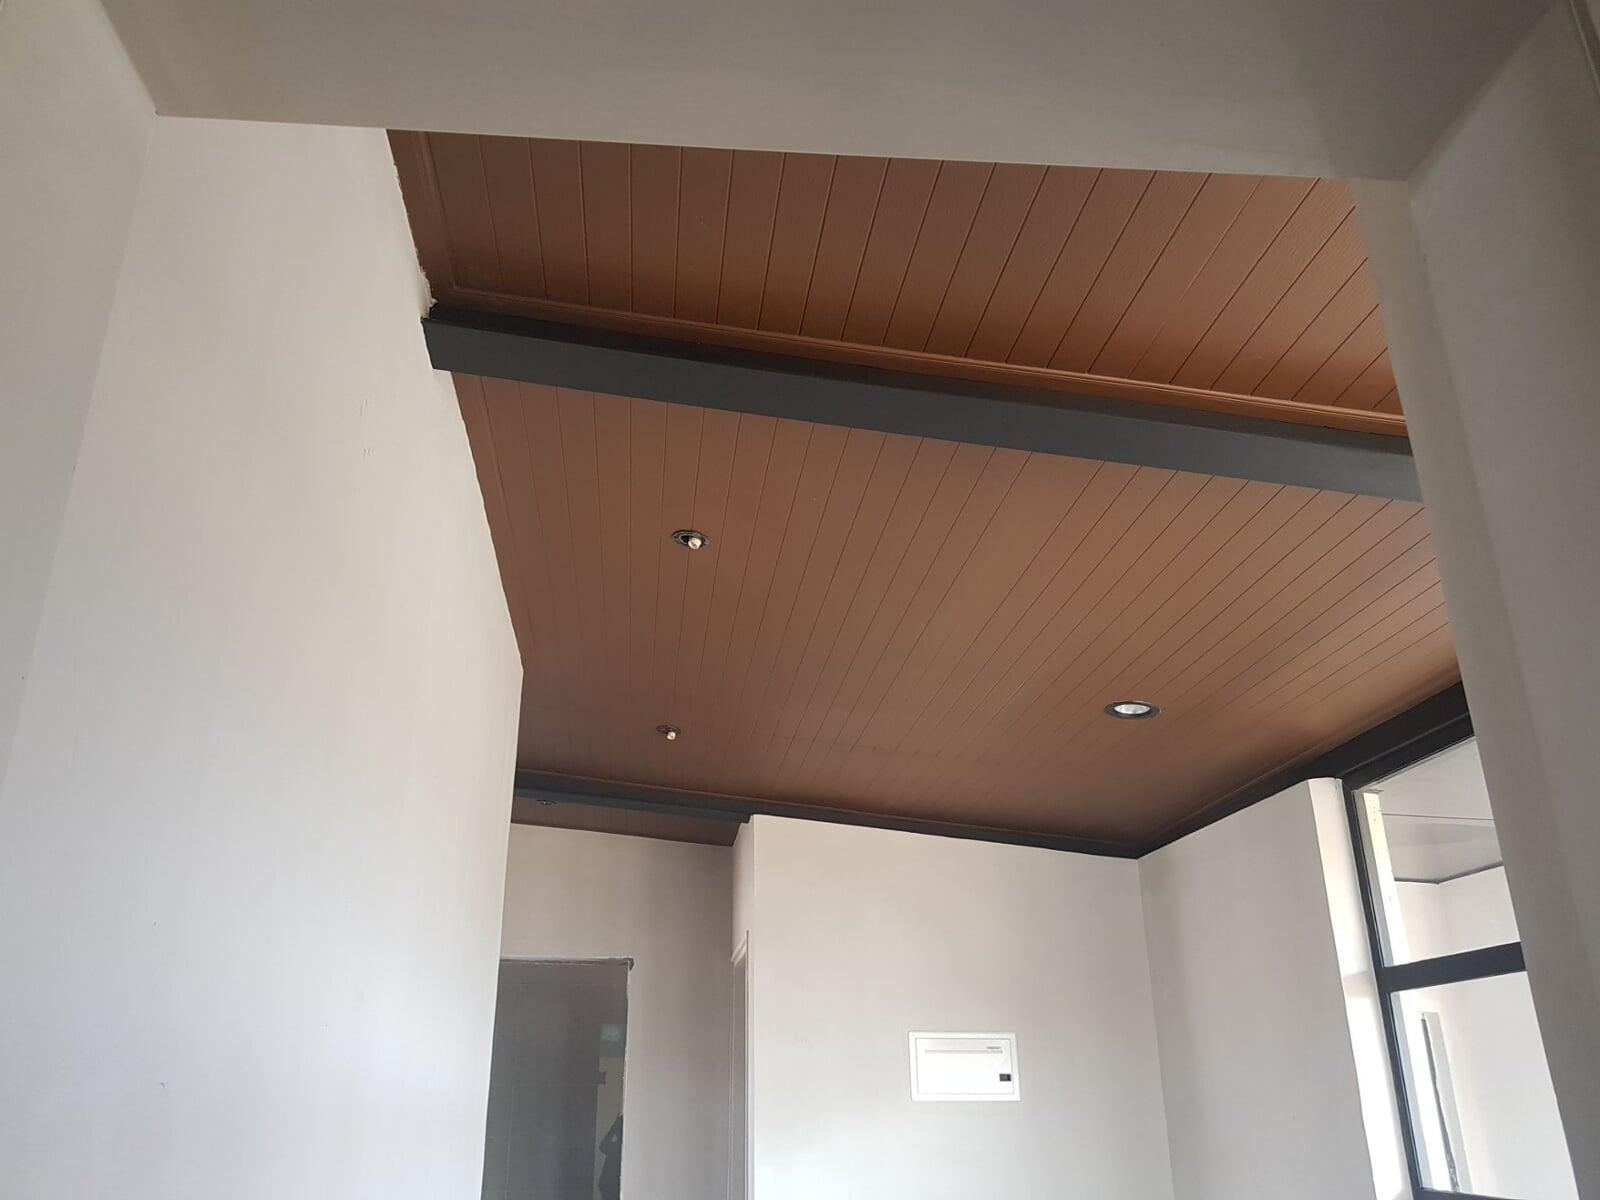 SHERA shiplap plank used as a decorative ceiling material